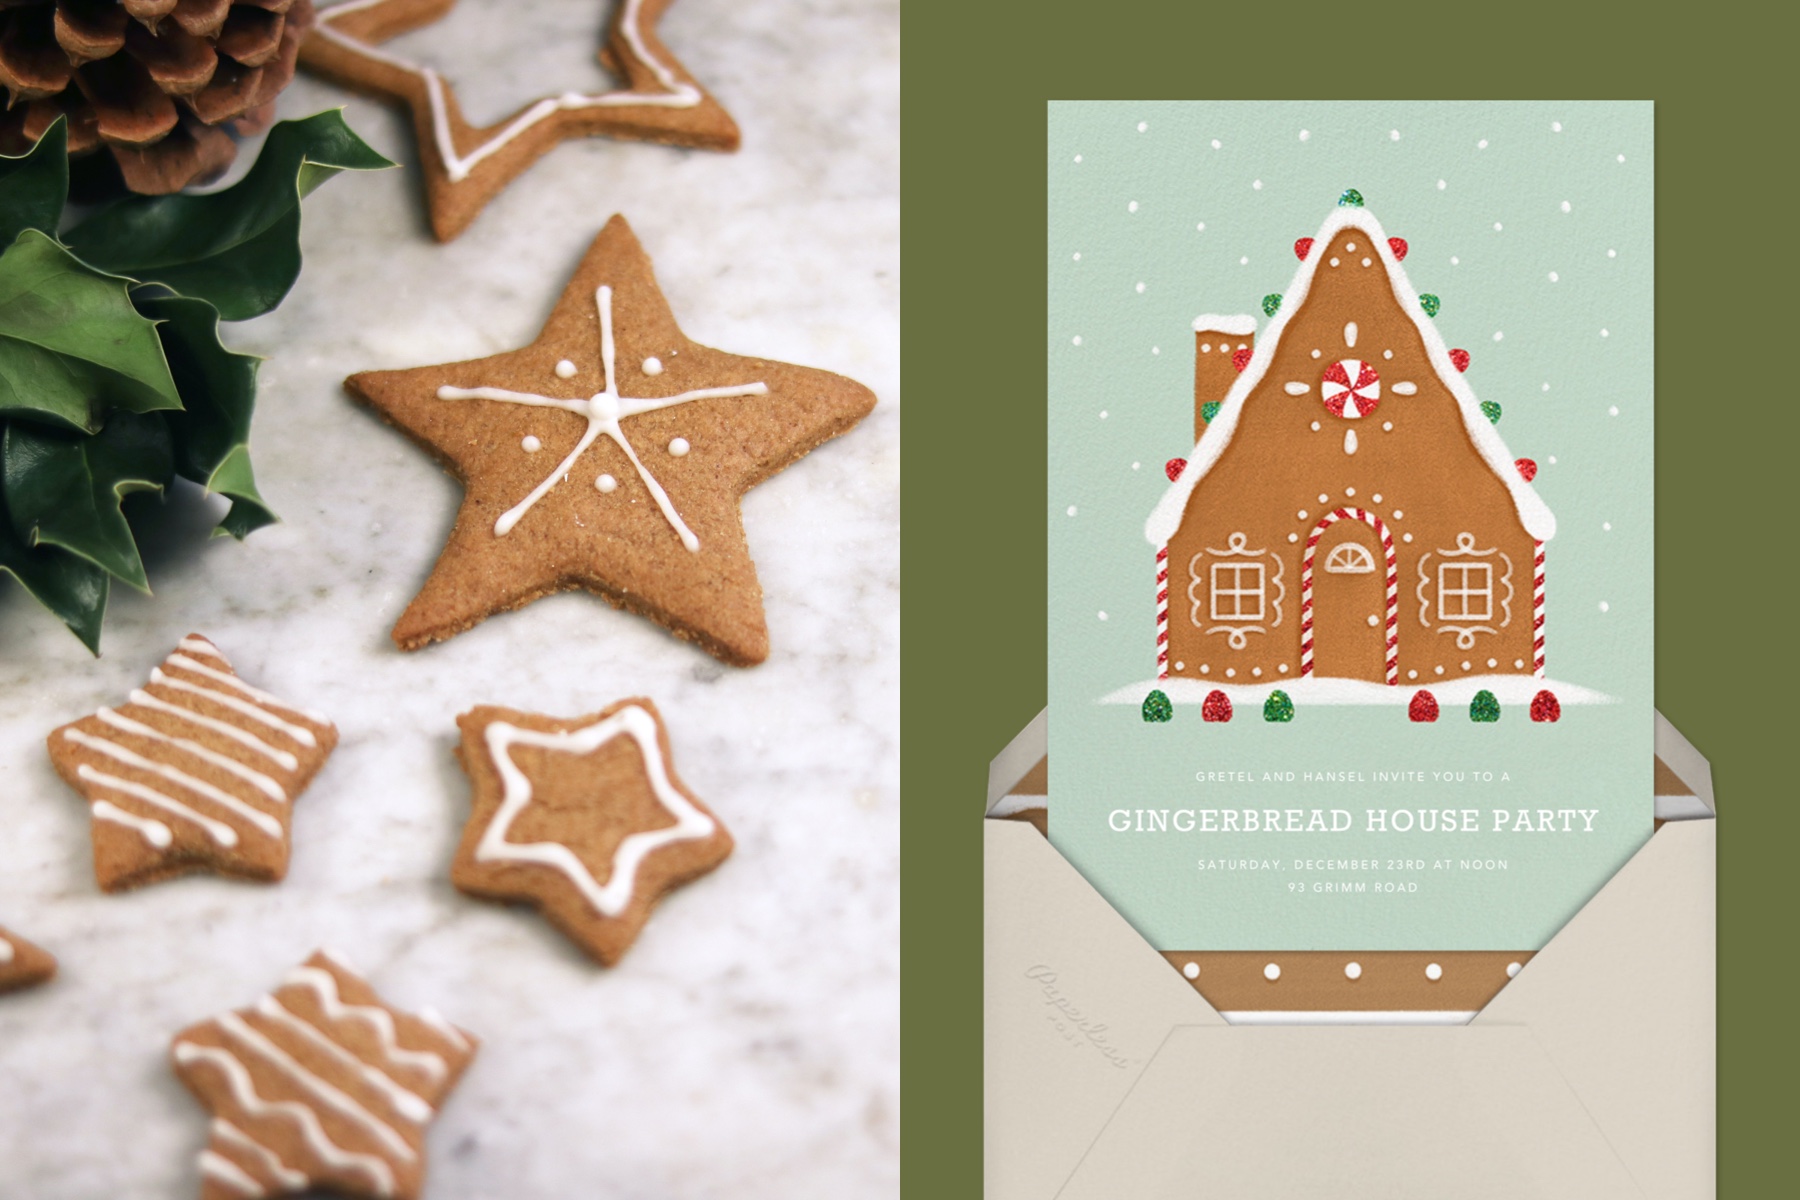 Left: Star-shaped gingerbread cookies. Right: An invitation with a gingerbread house. 